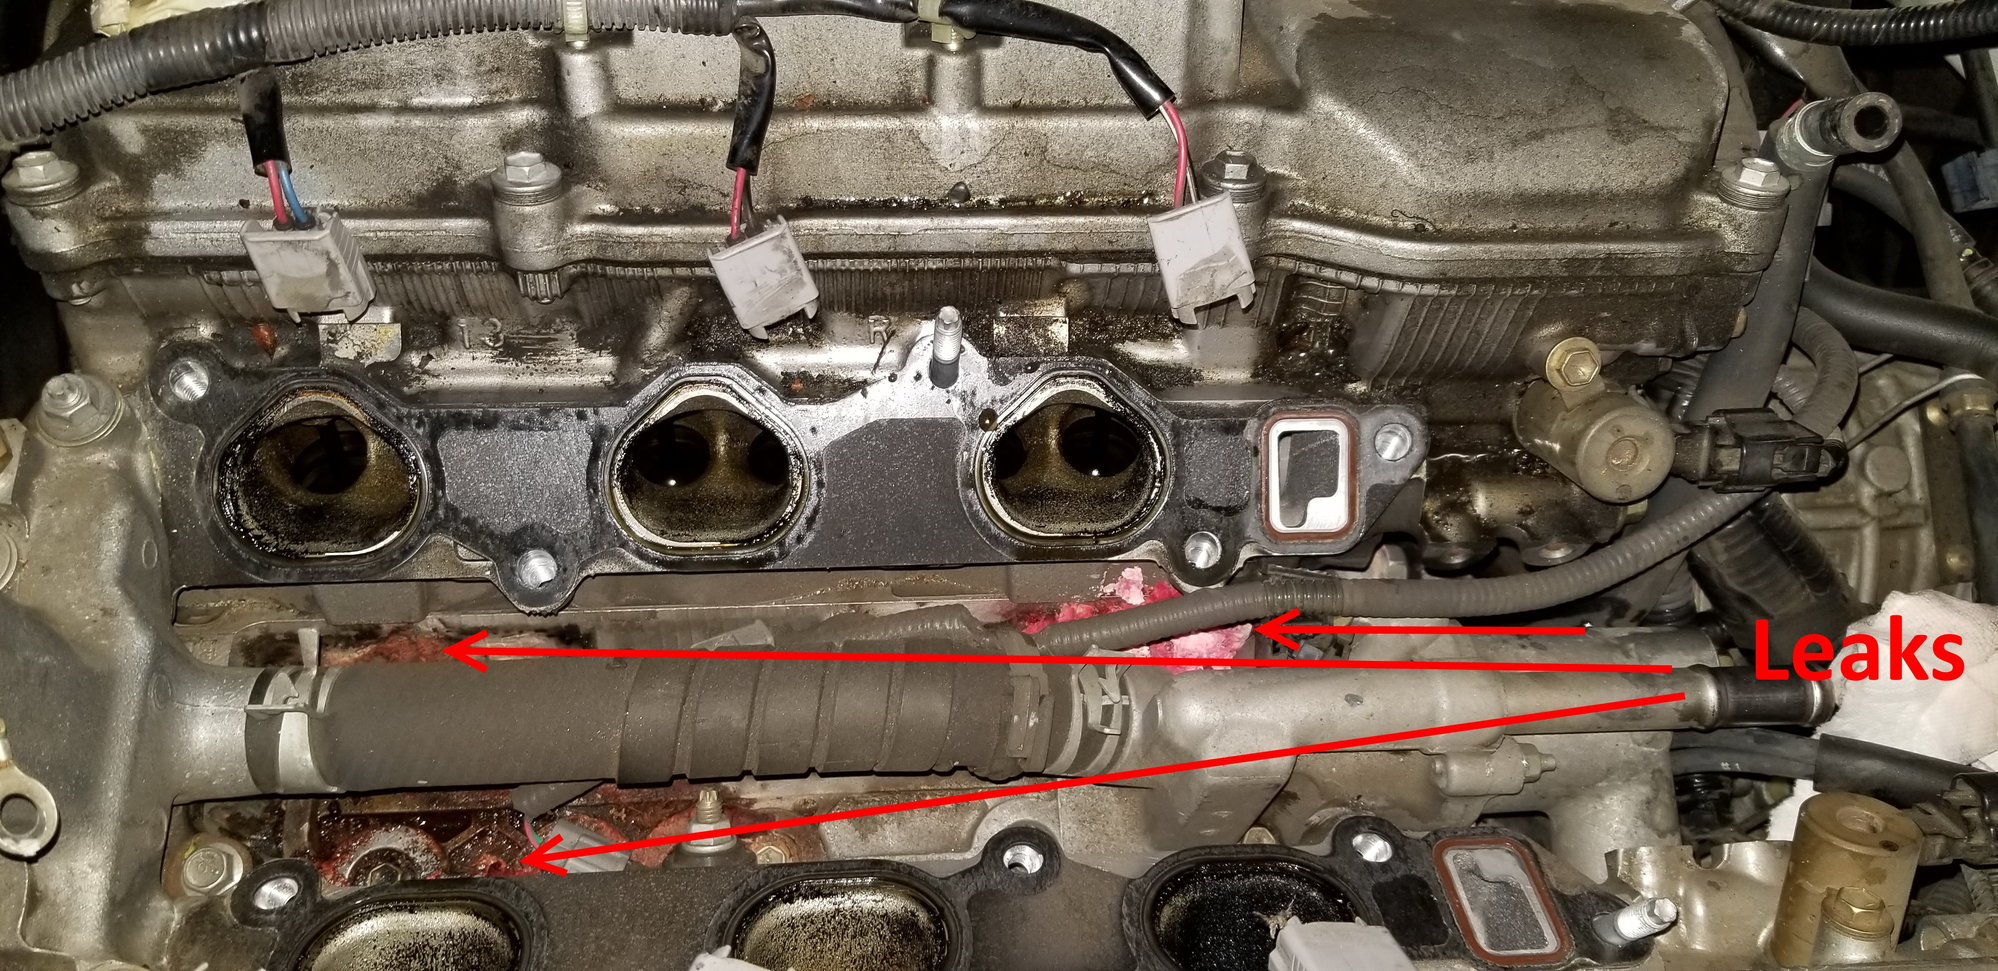 2004 RX330 coolant leak, from radiator or reservoir